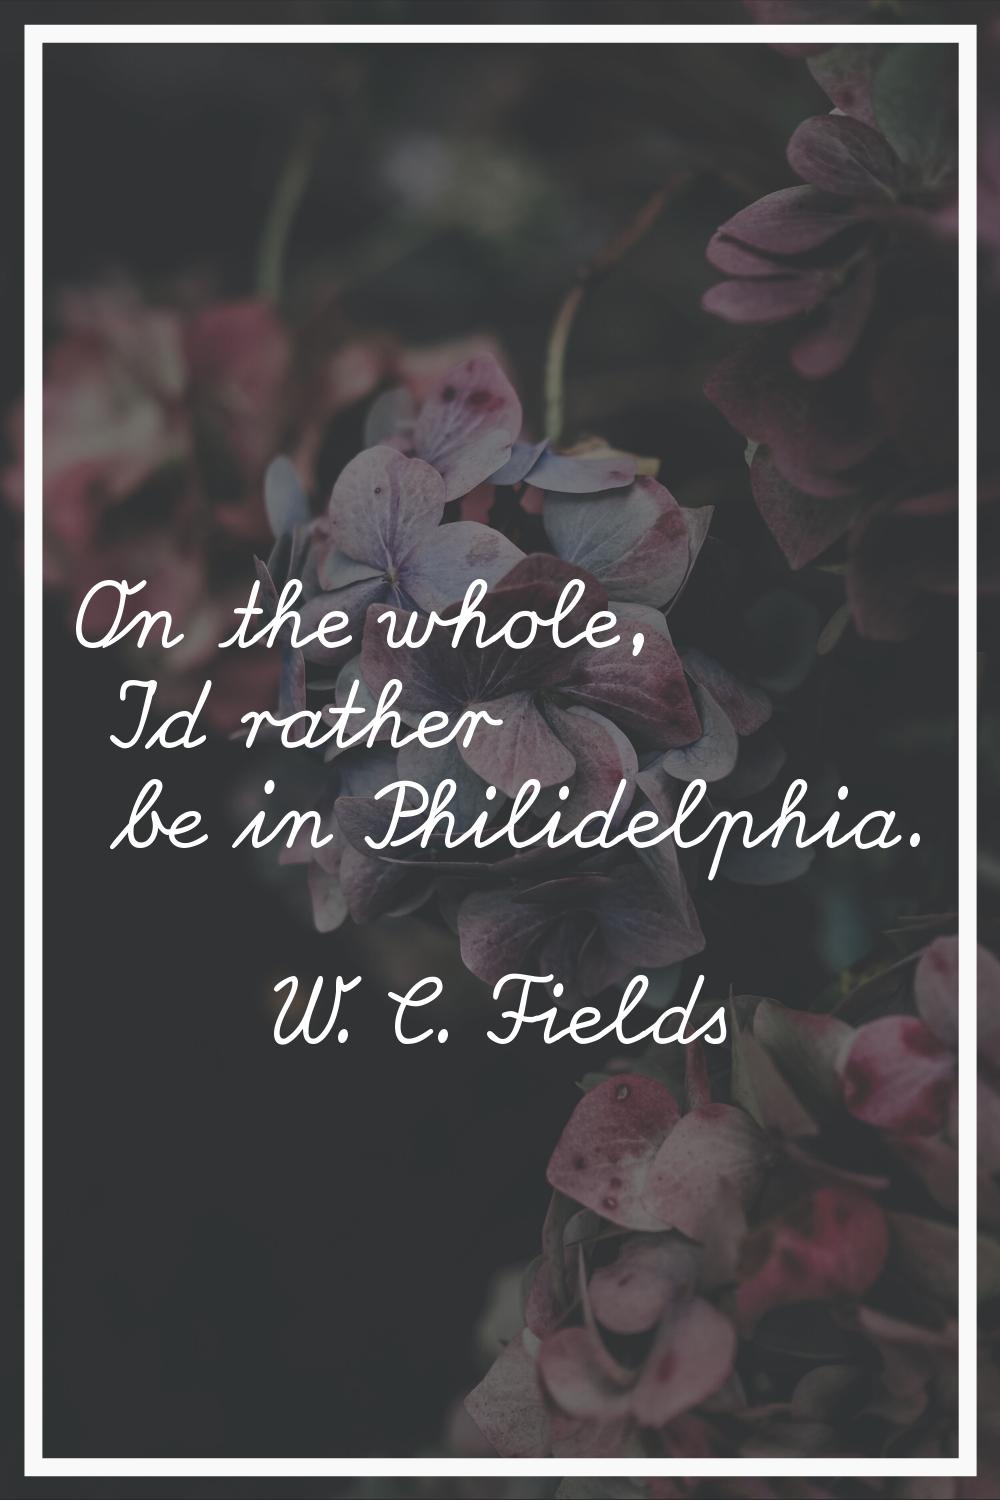 On the whole, I'd rather be in Philidelphia.